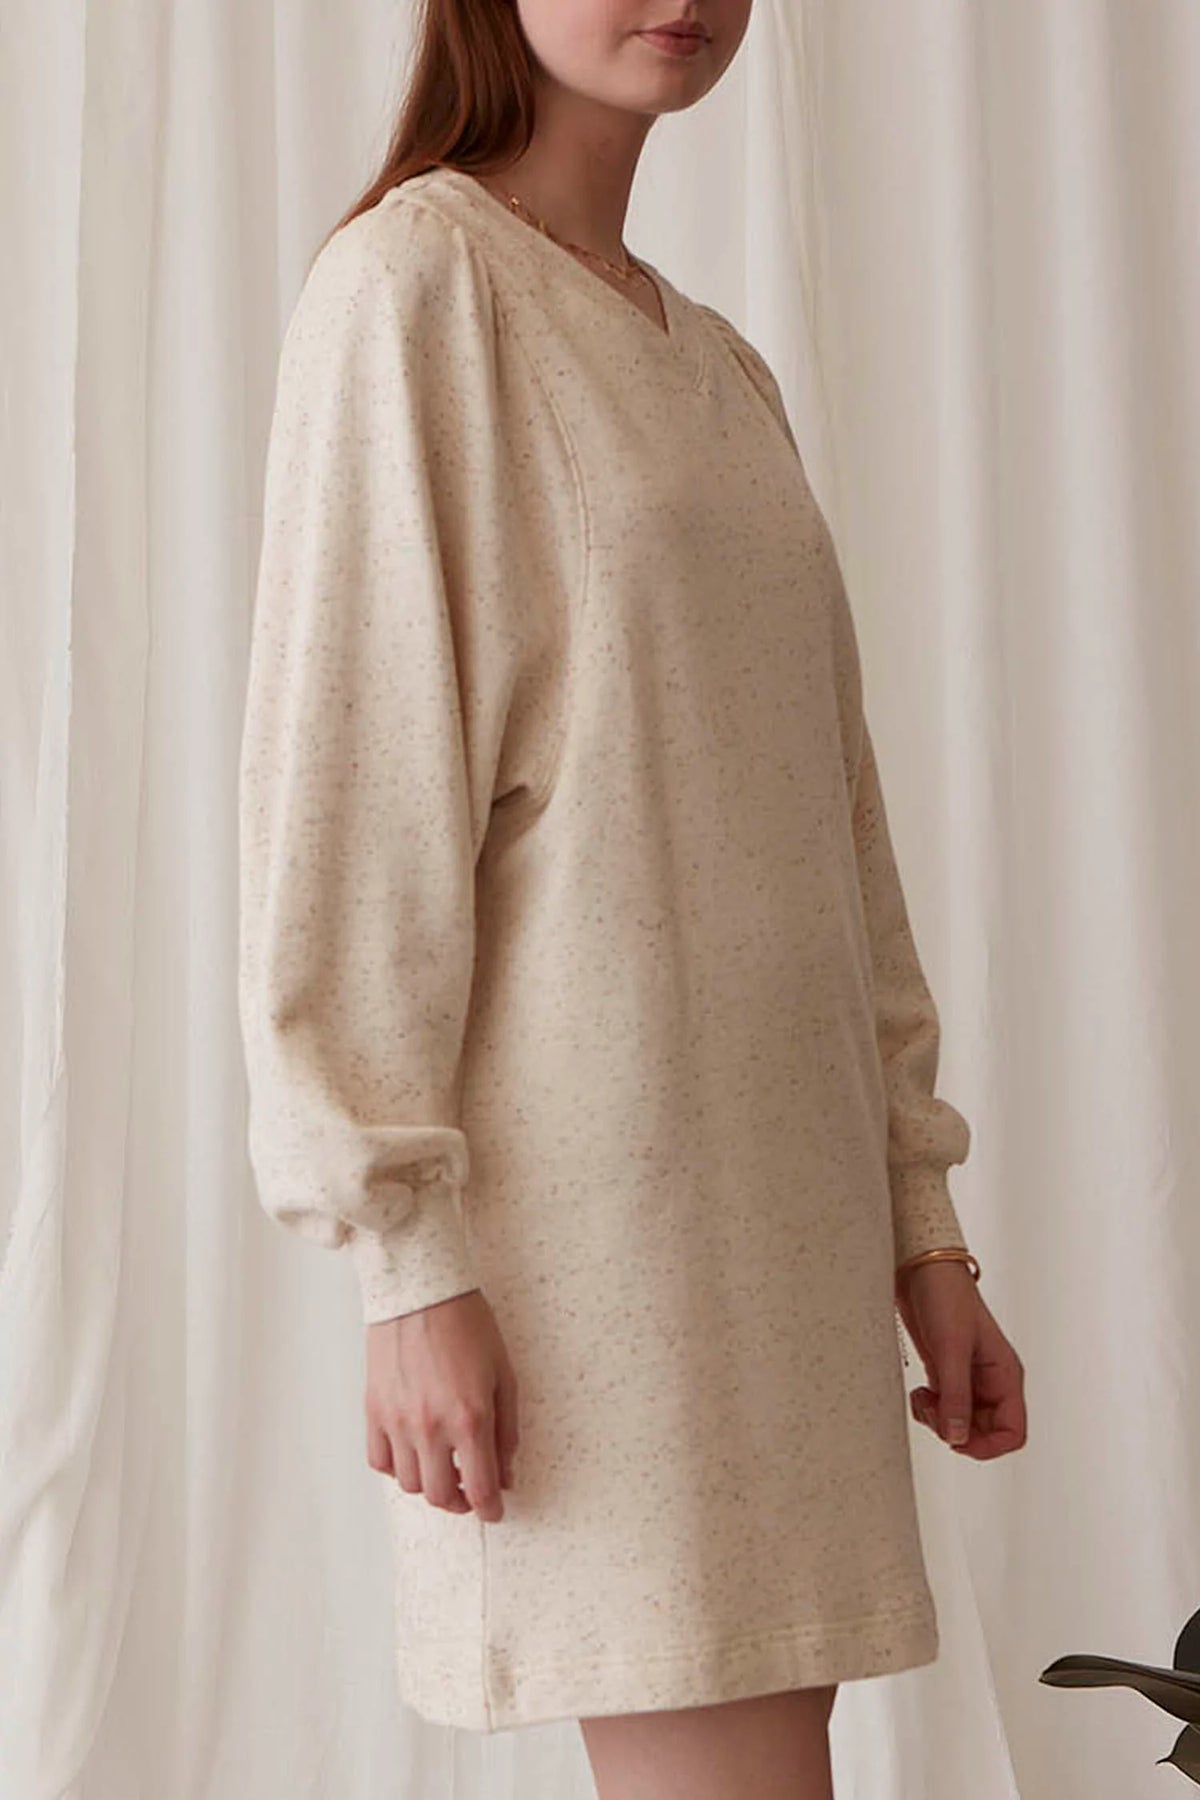 beige cotton lounge dress for sweater weather